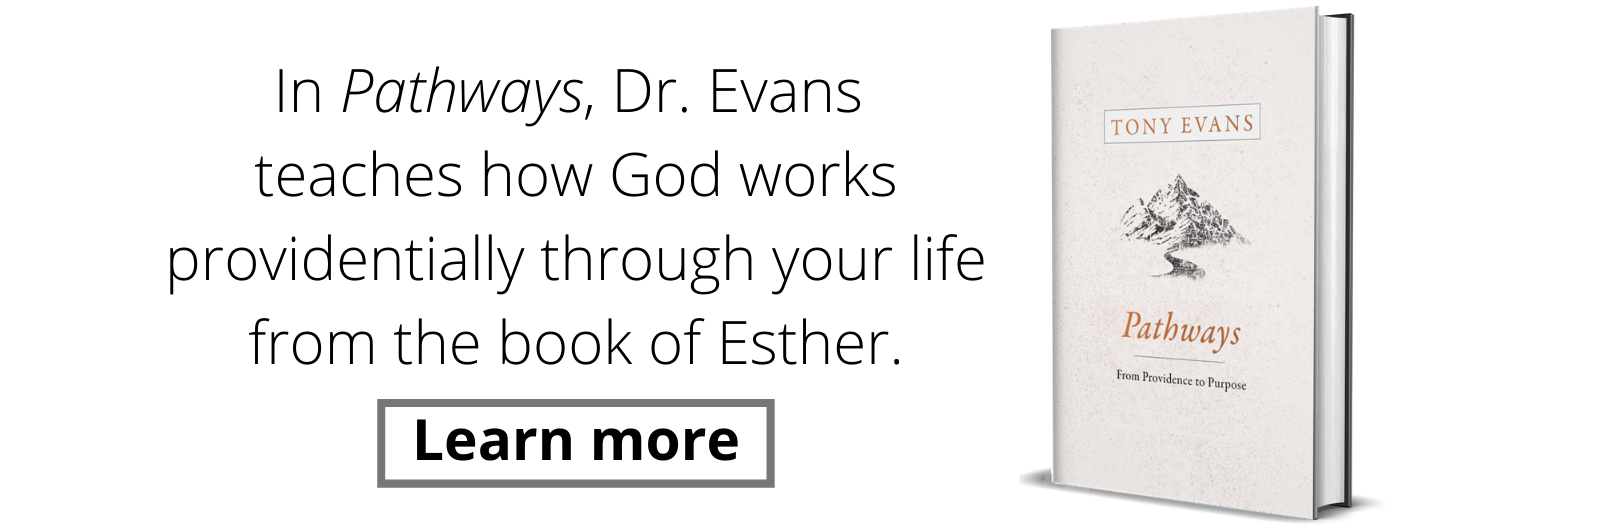 Learn more about Pathway by Dr. Tony Evans